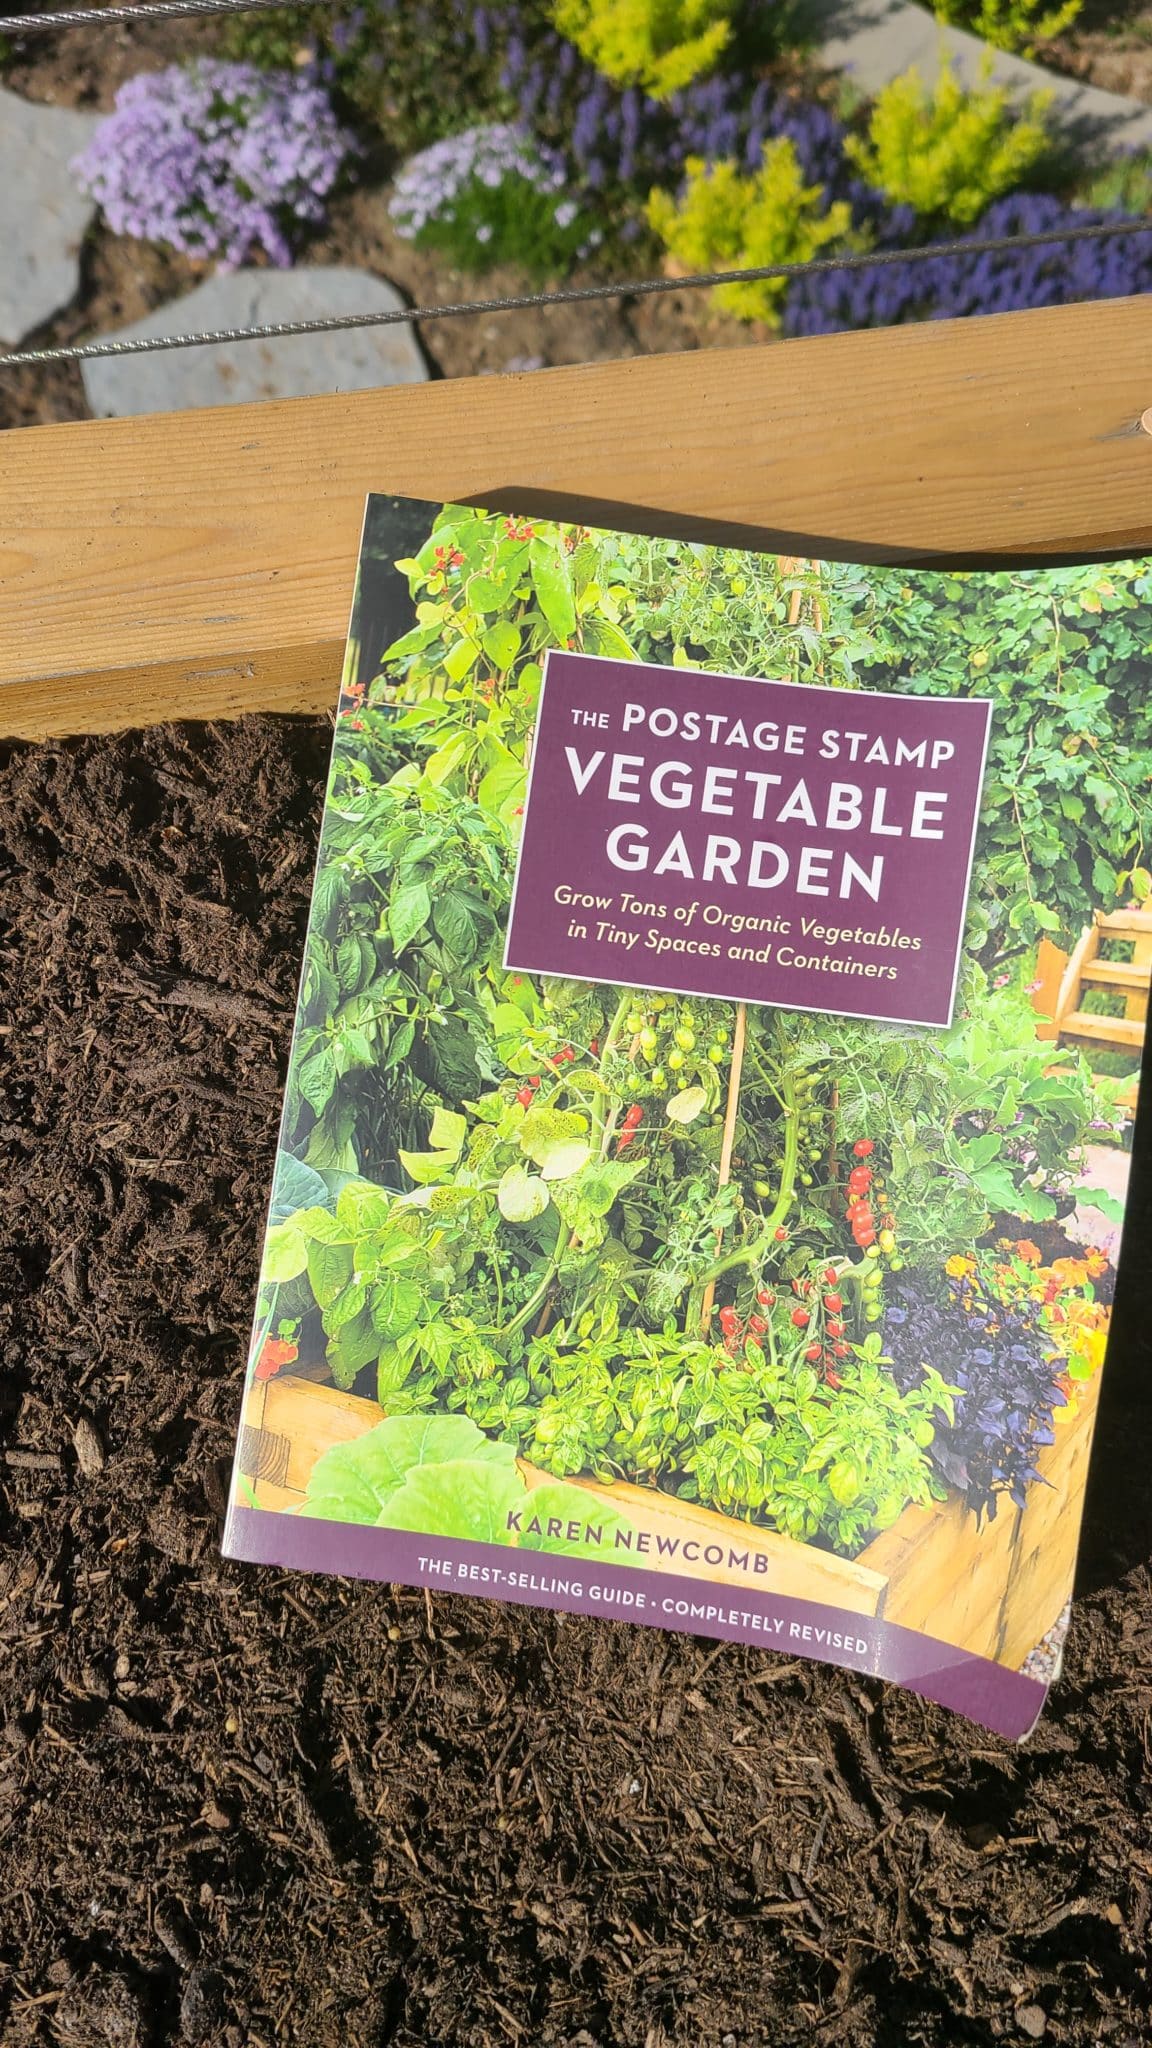 Beginner garden tips are reading books to gain knowledge. Image shows a gardening book on a raised planter box